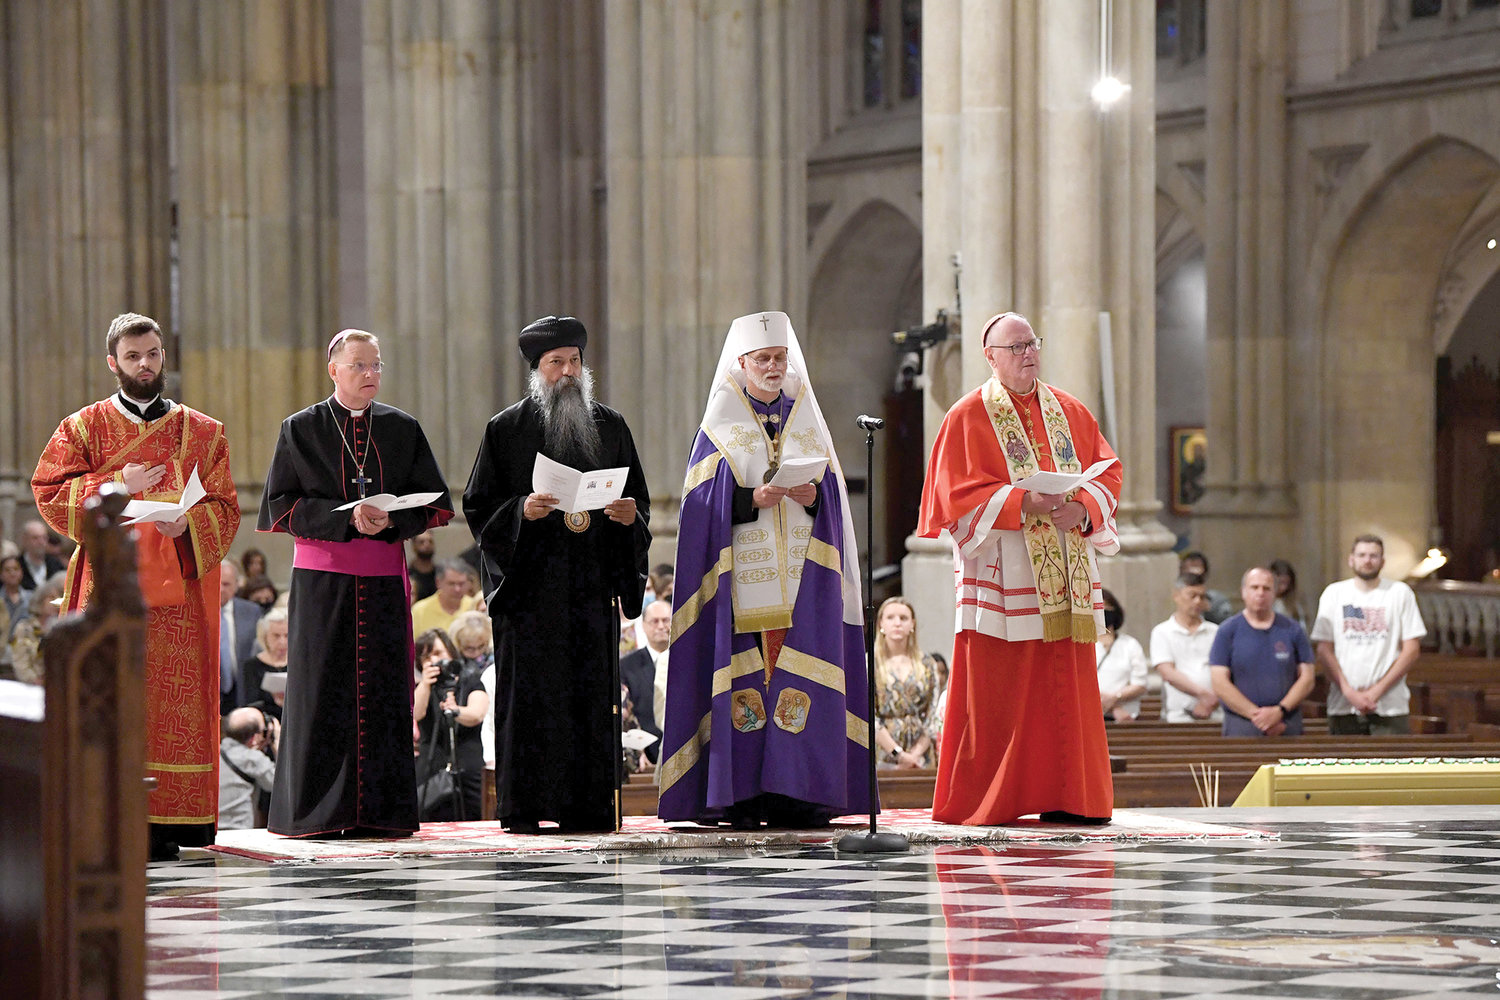 Cardinal Dolan and Archbishop Borys Gudziak of the Ukrainian Catholic Archeparchy of Philadelphia, to the left of the cardinal, lead a prayer service for  victims of the war in Ukraine June 11 at St. Patrick’s Cathedral. Also attending the Panakhyda (service for the deceased) were His Grace Bishop David of the Coptic Orthodox Diocese of New York and New England, center, and Auxiliary Bishop Edmund Whalen, second from left.